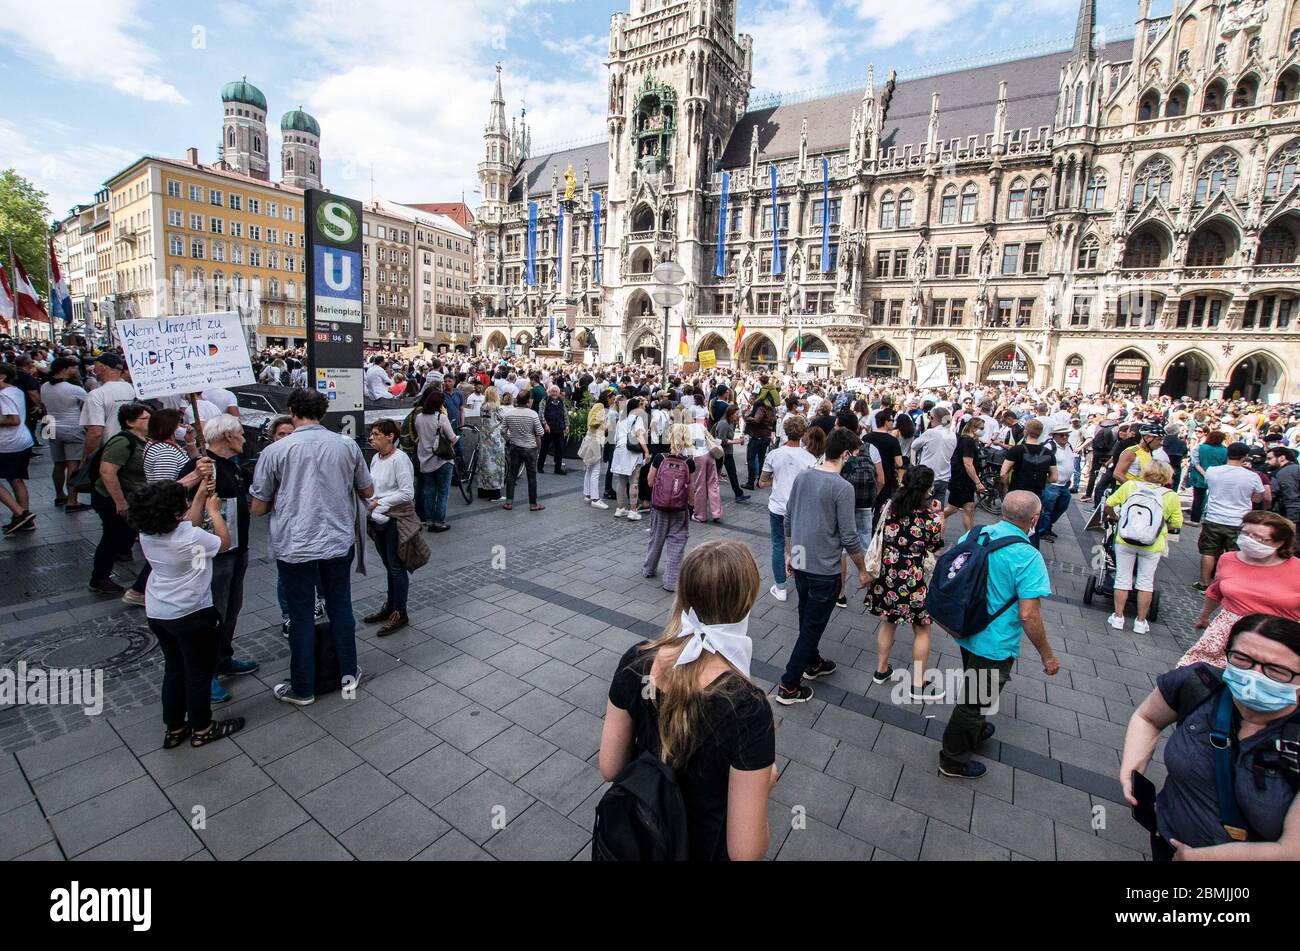 Munich, Bavaria, Germany. 9th May, 2020. Despite ongoing relaxing measures, a 'Querfront'' (cross-front) mixture of 3,000 conspiracy theorists, QAnon followers, right-extremists, AfD figures, neonazis, hooligans, and Widerstand2020 assembled for a third weekend in Munich's city center, primarily at Marienplatz, to demonstrate for restoration of the Grundgesetz amid the Coronavirus crisis. Such demos and daily mini-demos with an overwhelming 2015-2016 Pegida quality are being staged throughout Germany, with two attacks on journalists for ARD and ZDF having taken place. Internally, members Stock Photo